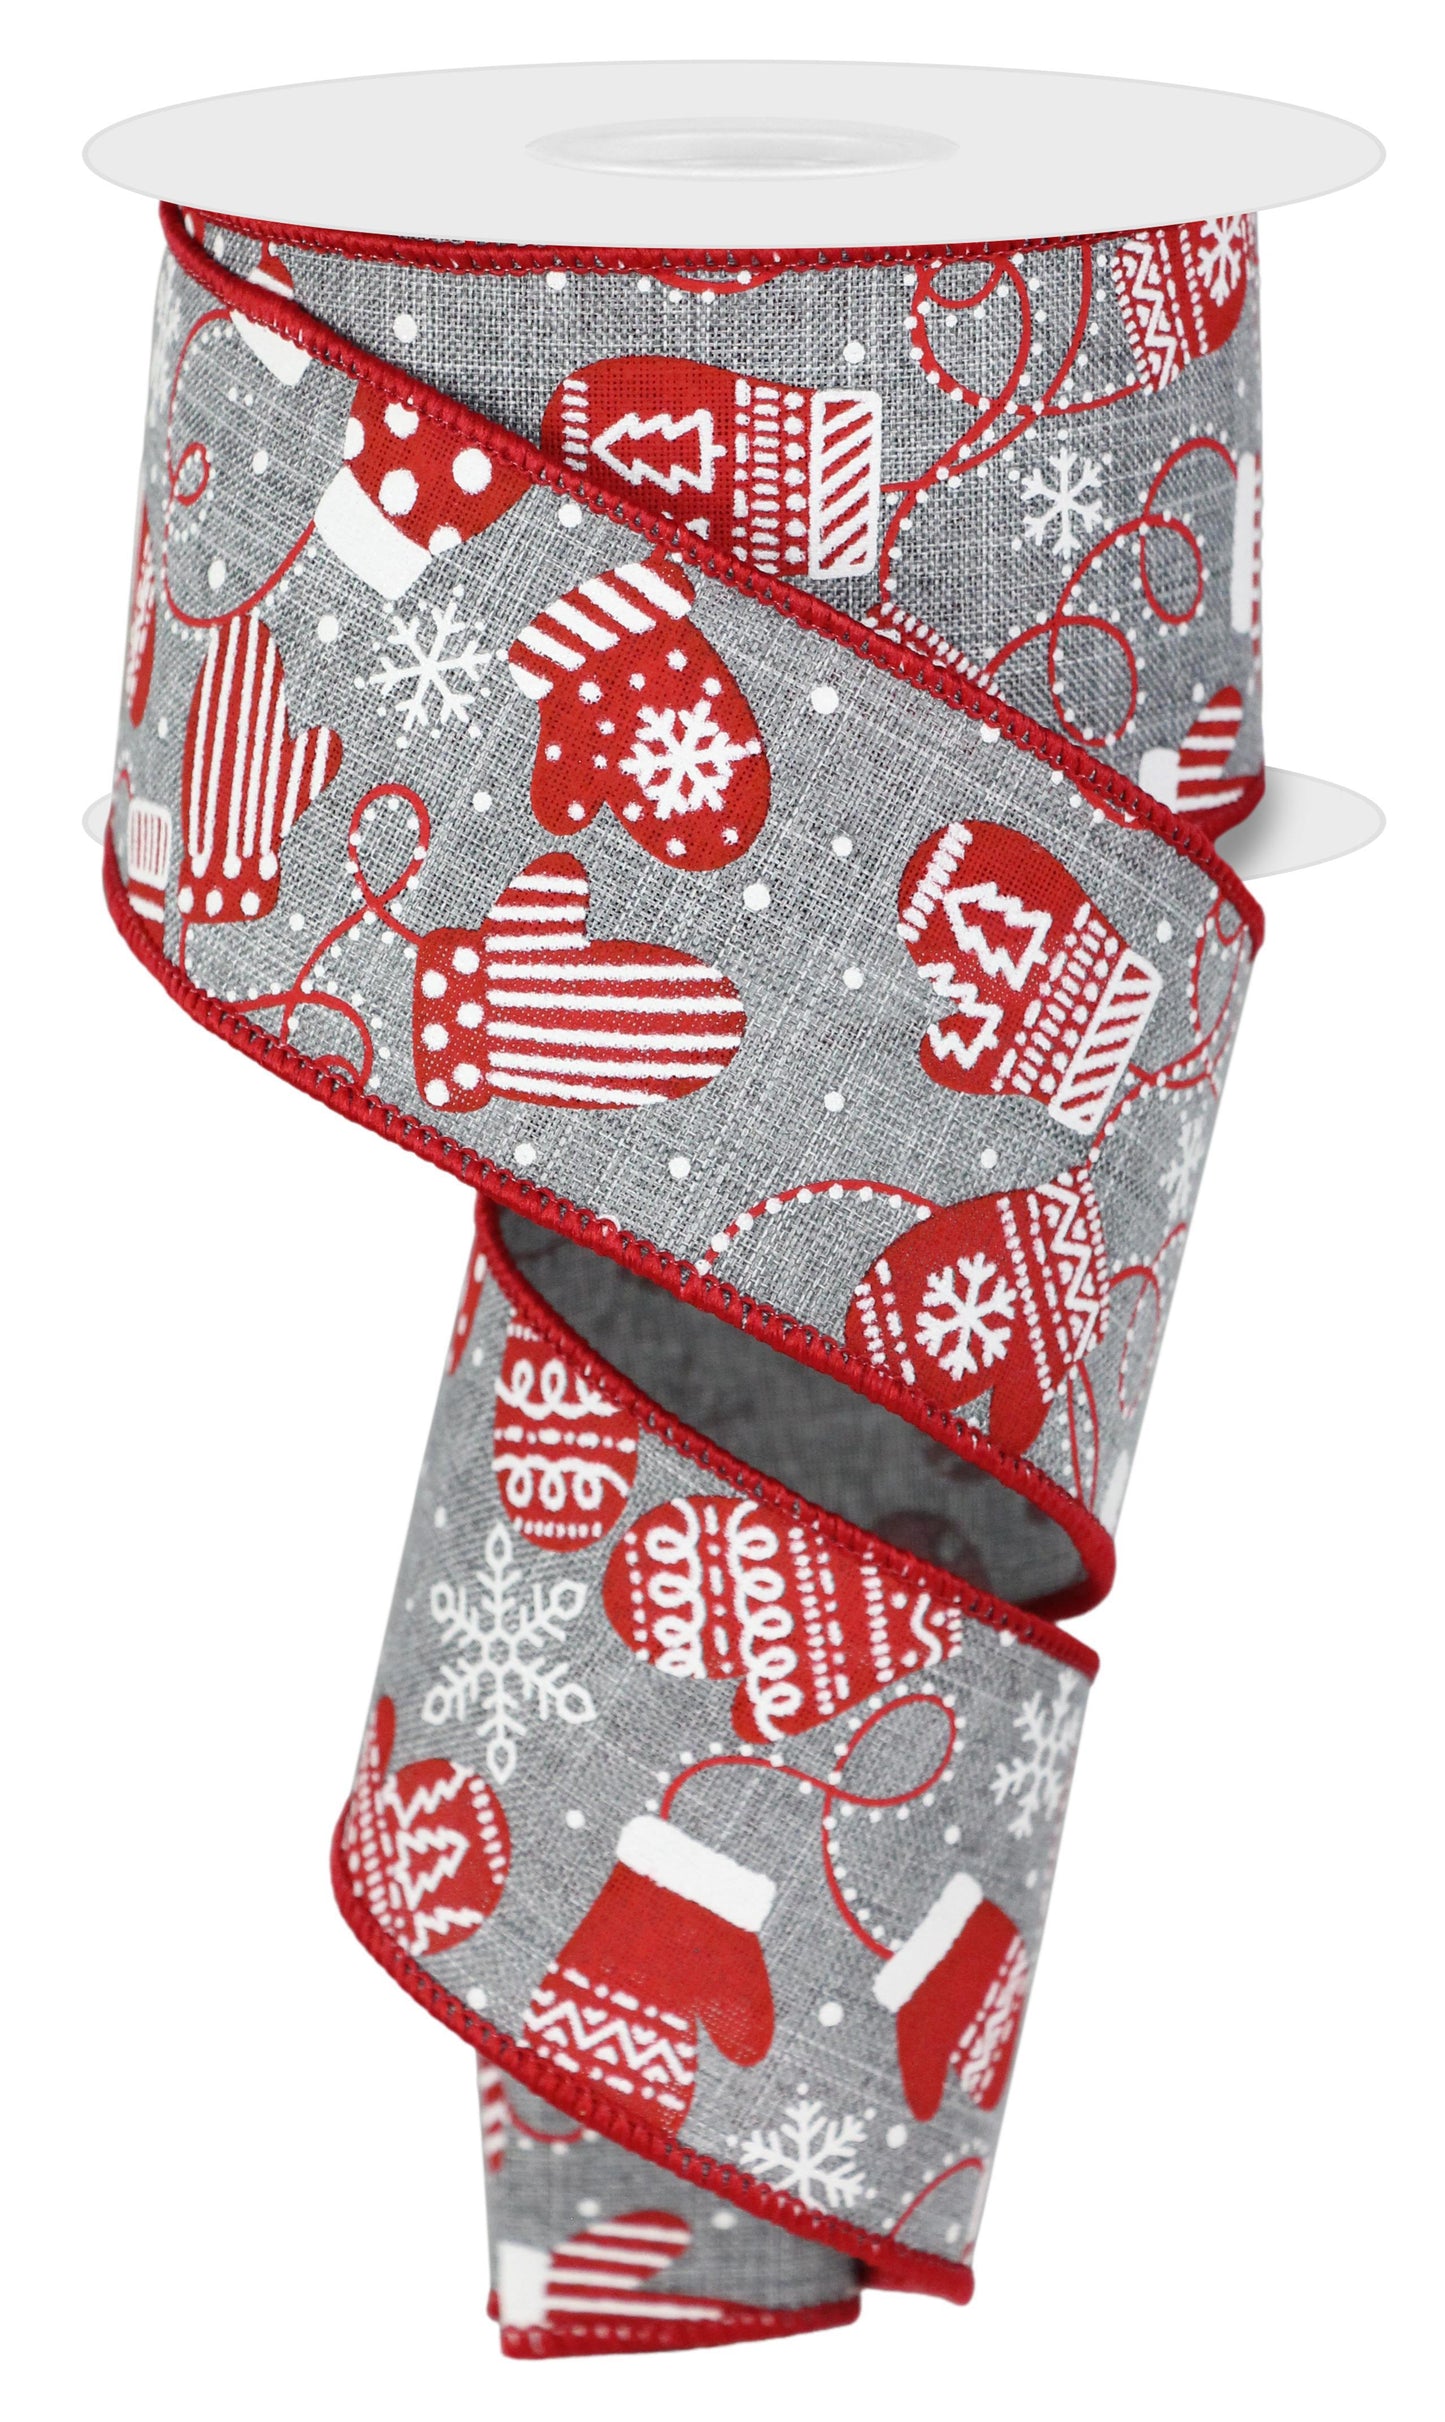 Wired Ribbon * Christmas Mittens * Red, Grey and White Canvas  * 2.5" x 10 Yards * RGE197010